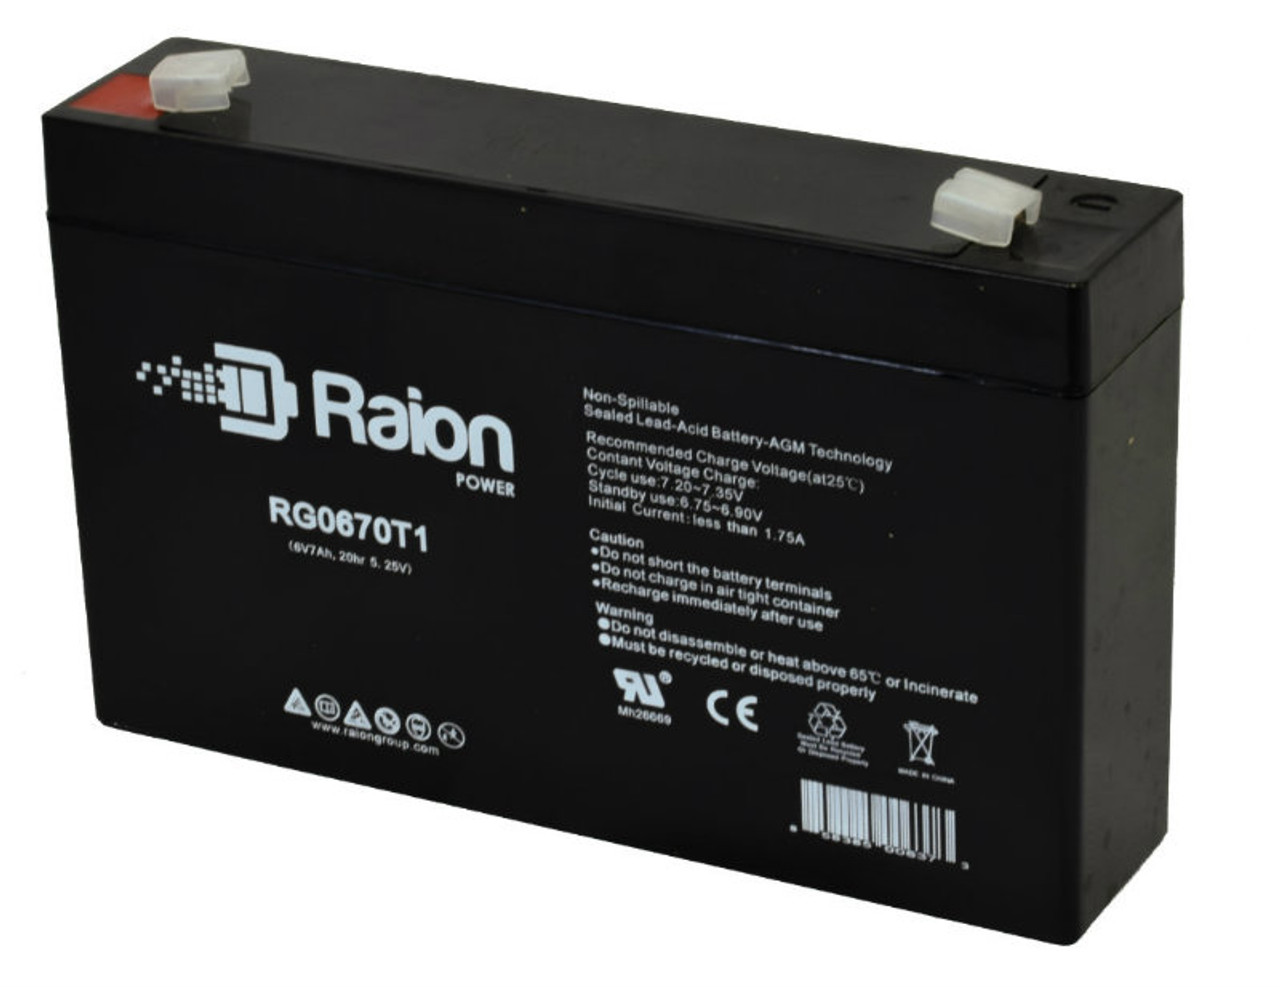 Raion Power RG0670T1 6V 7Ah Replacement Emergency Lighting Battery for Edwards 1799109ST